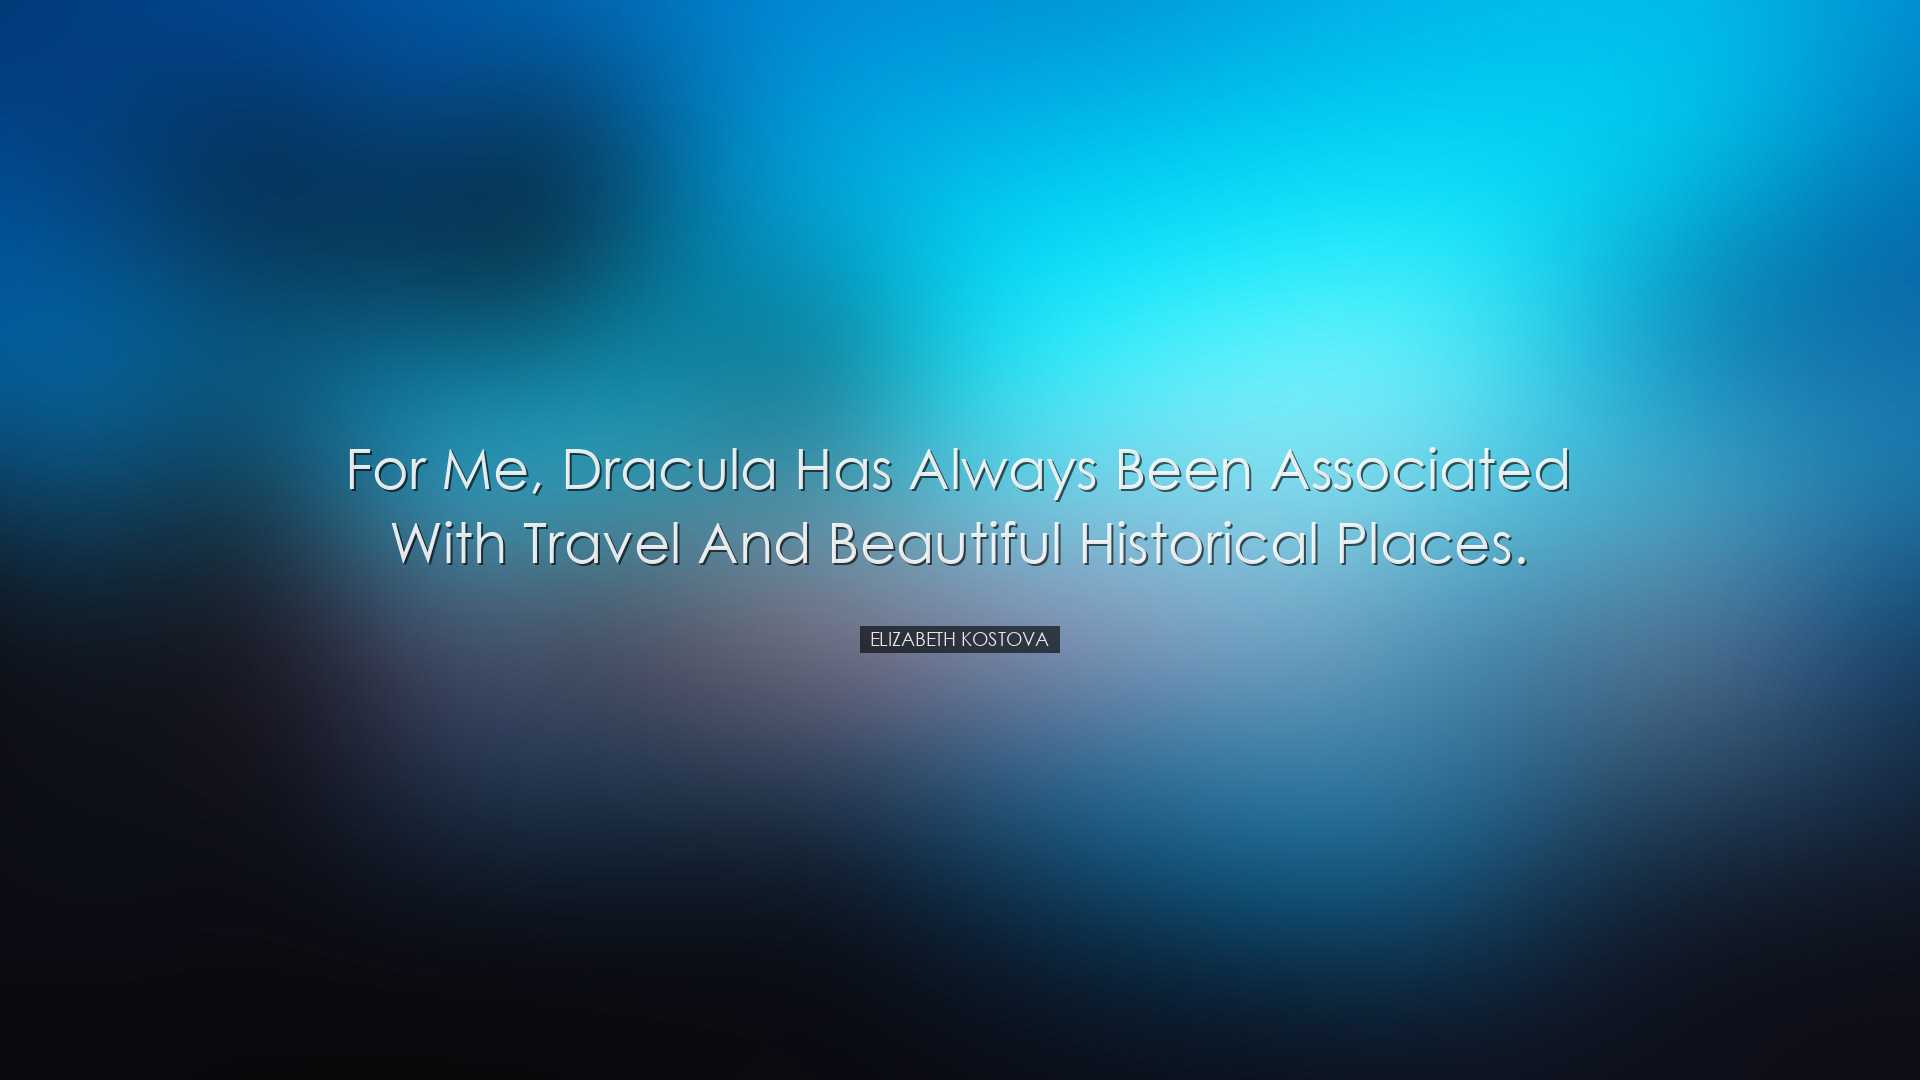 For me, Dracula has always been associated with travel and beautif